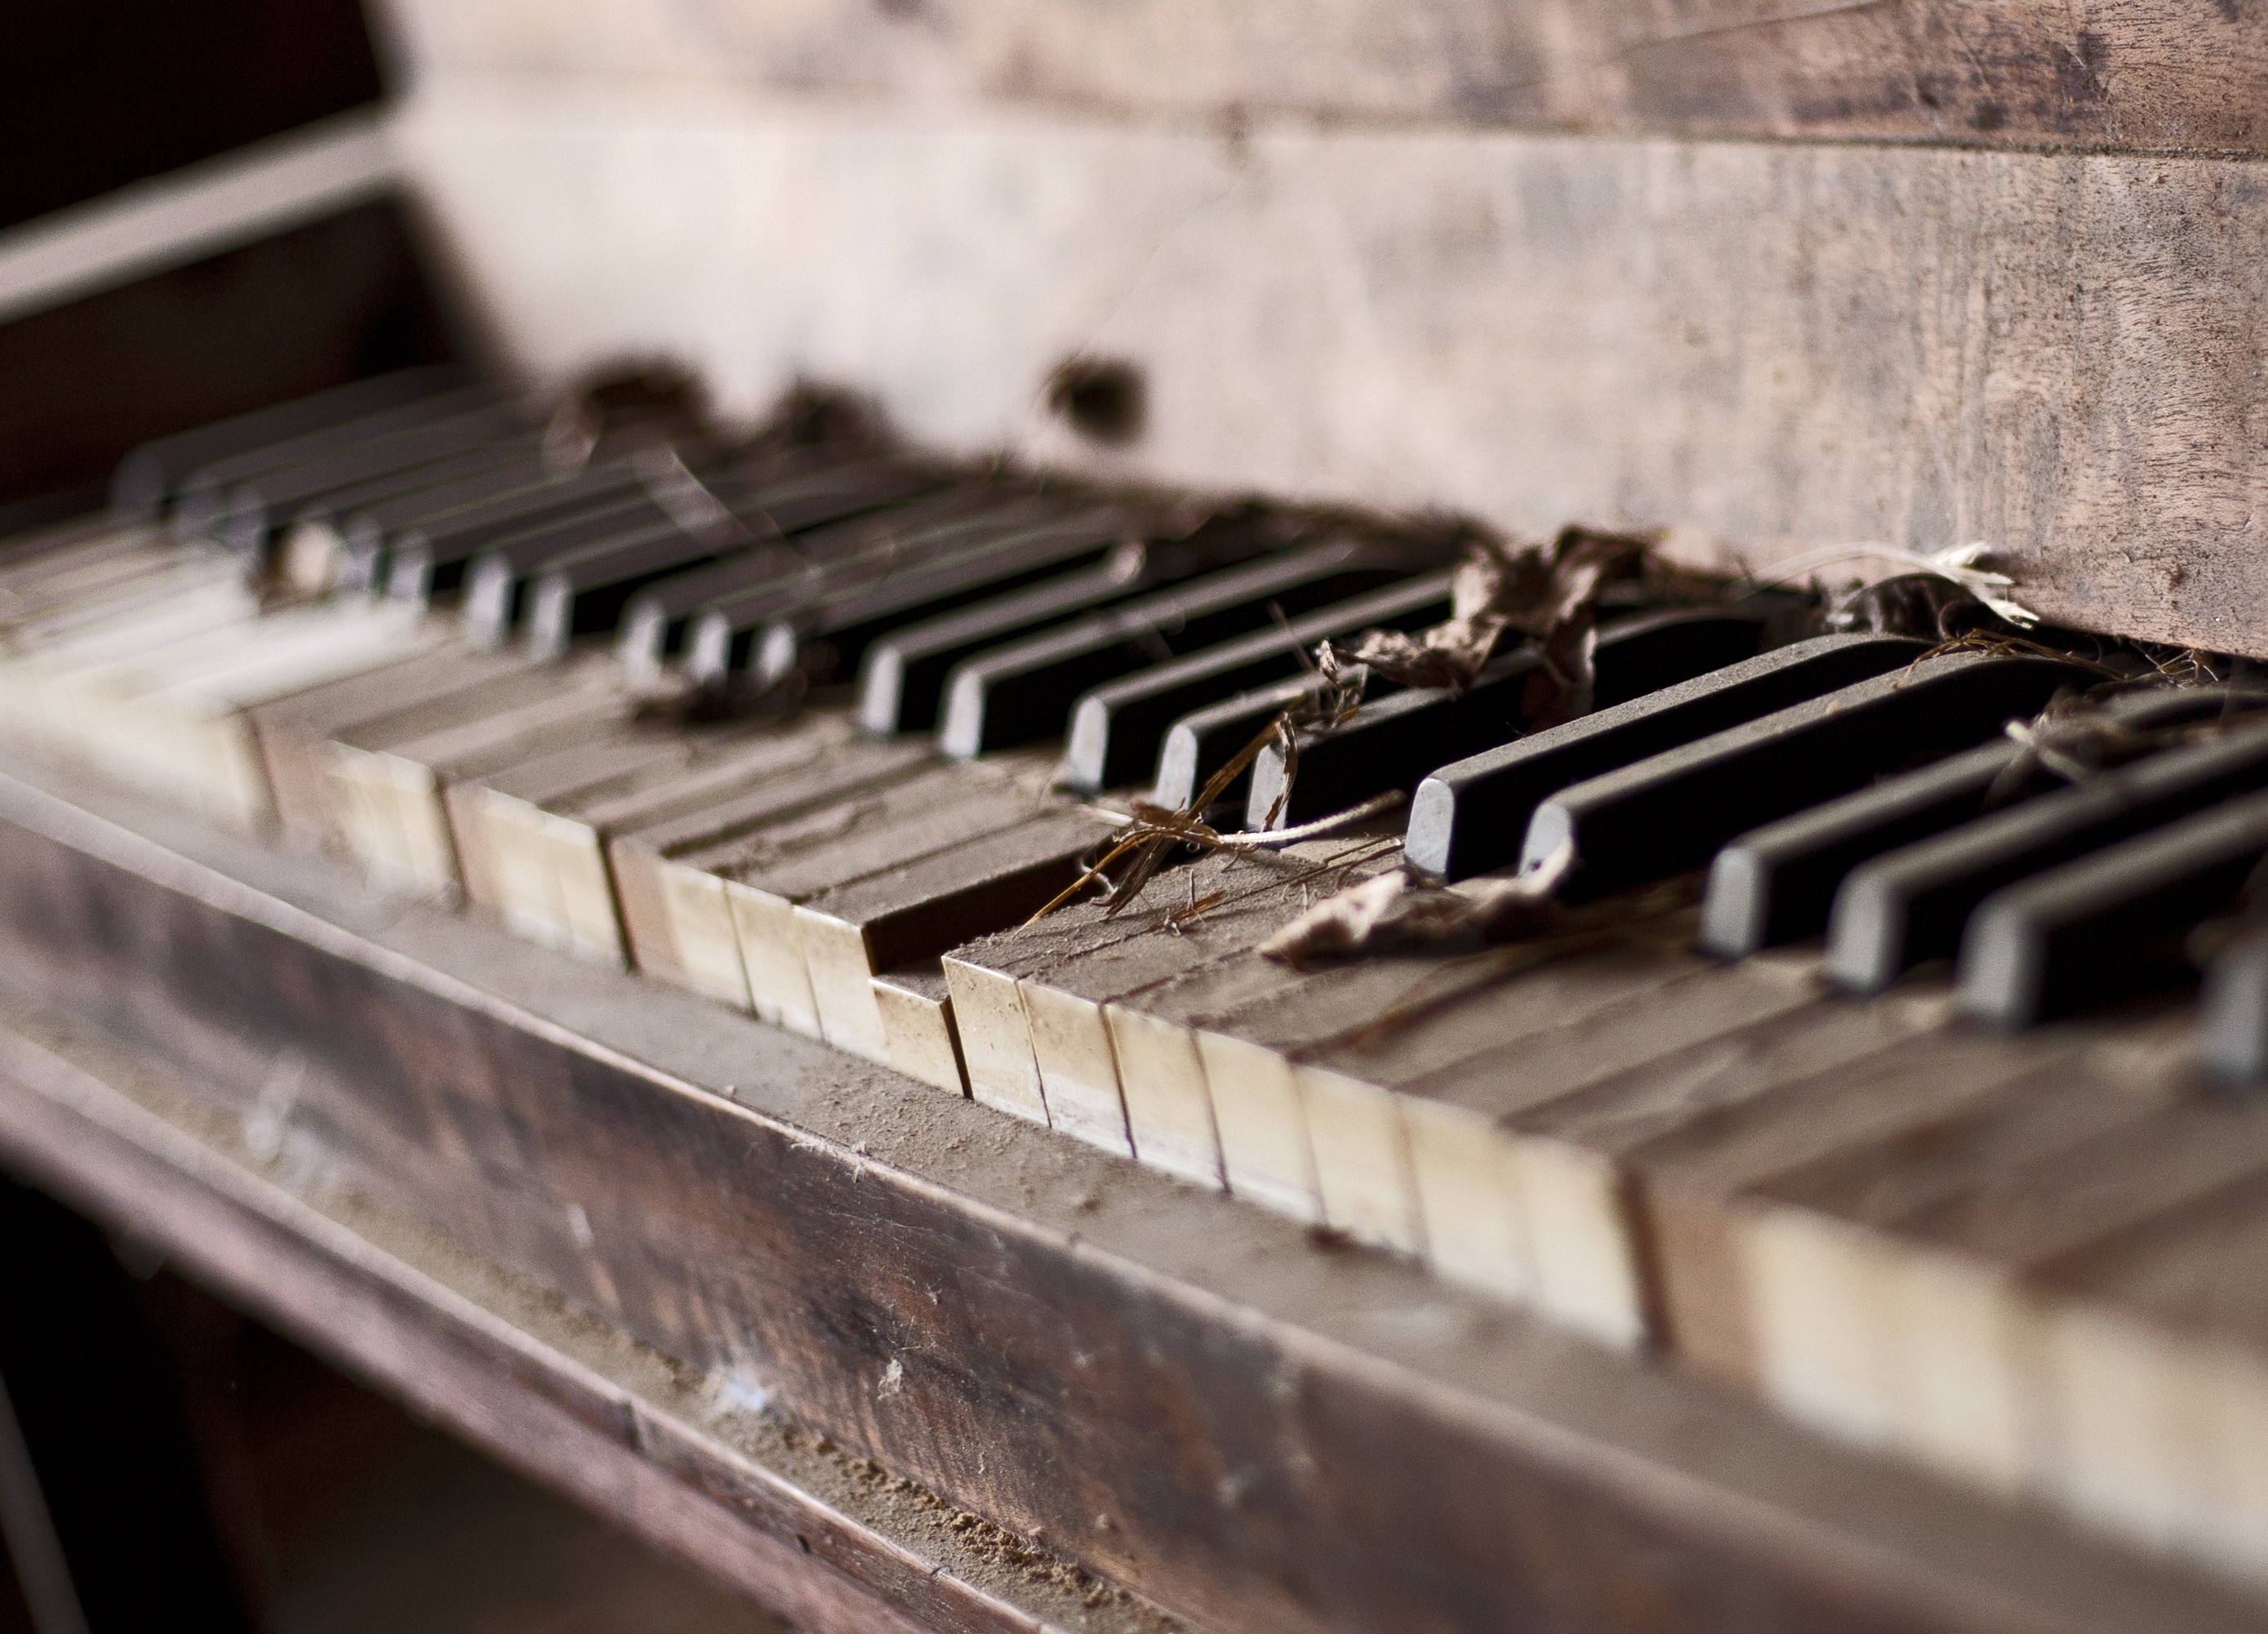 Clean your dirty piano keys safely with toothpaste. Wipe any excess off with a damp cloth and then buff gently.